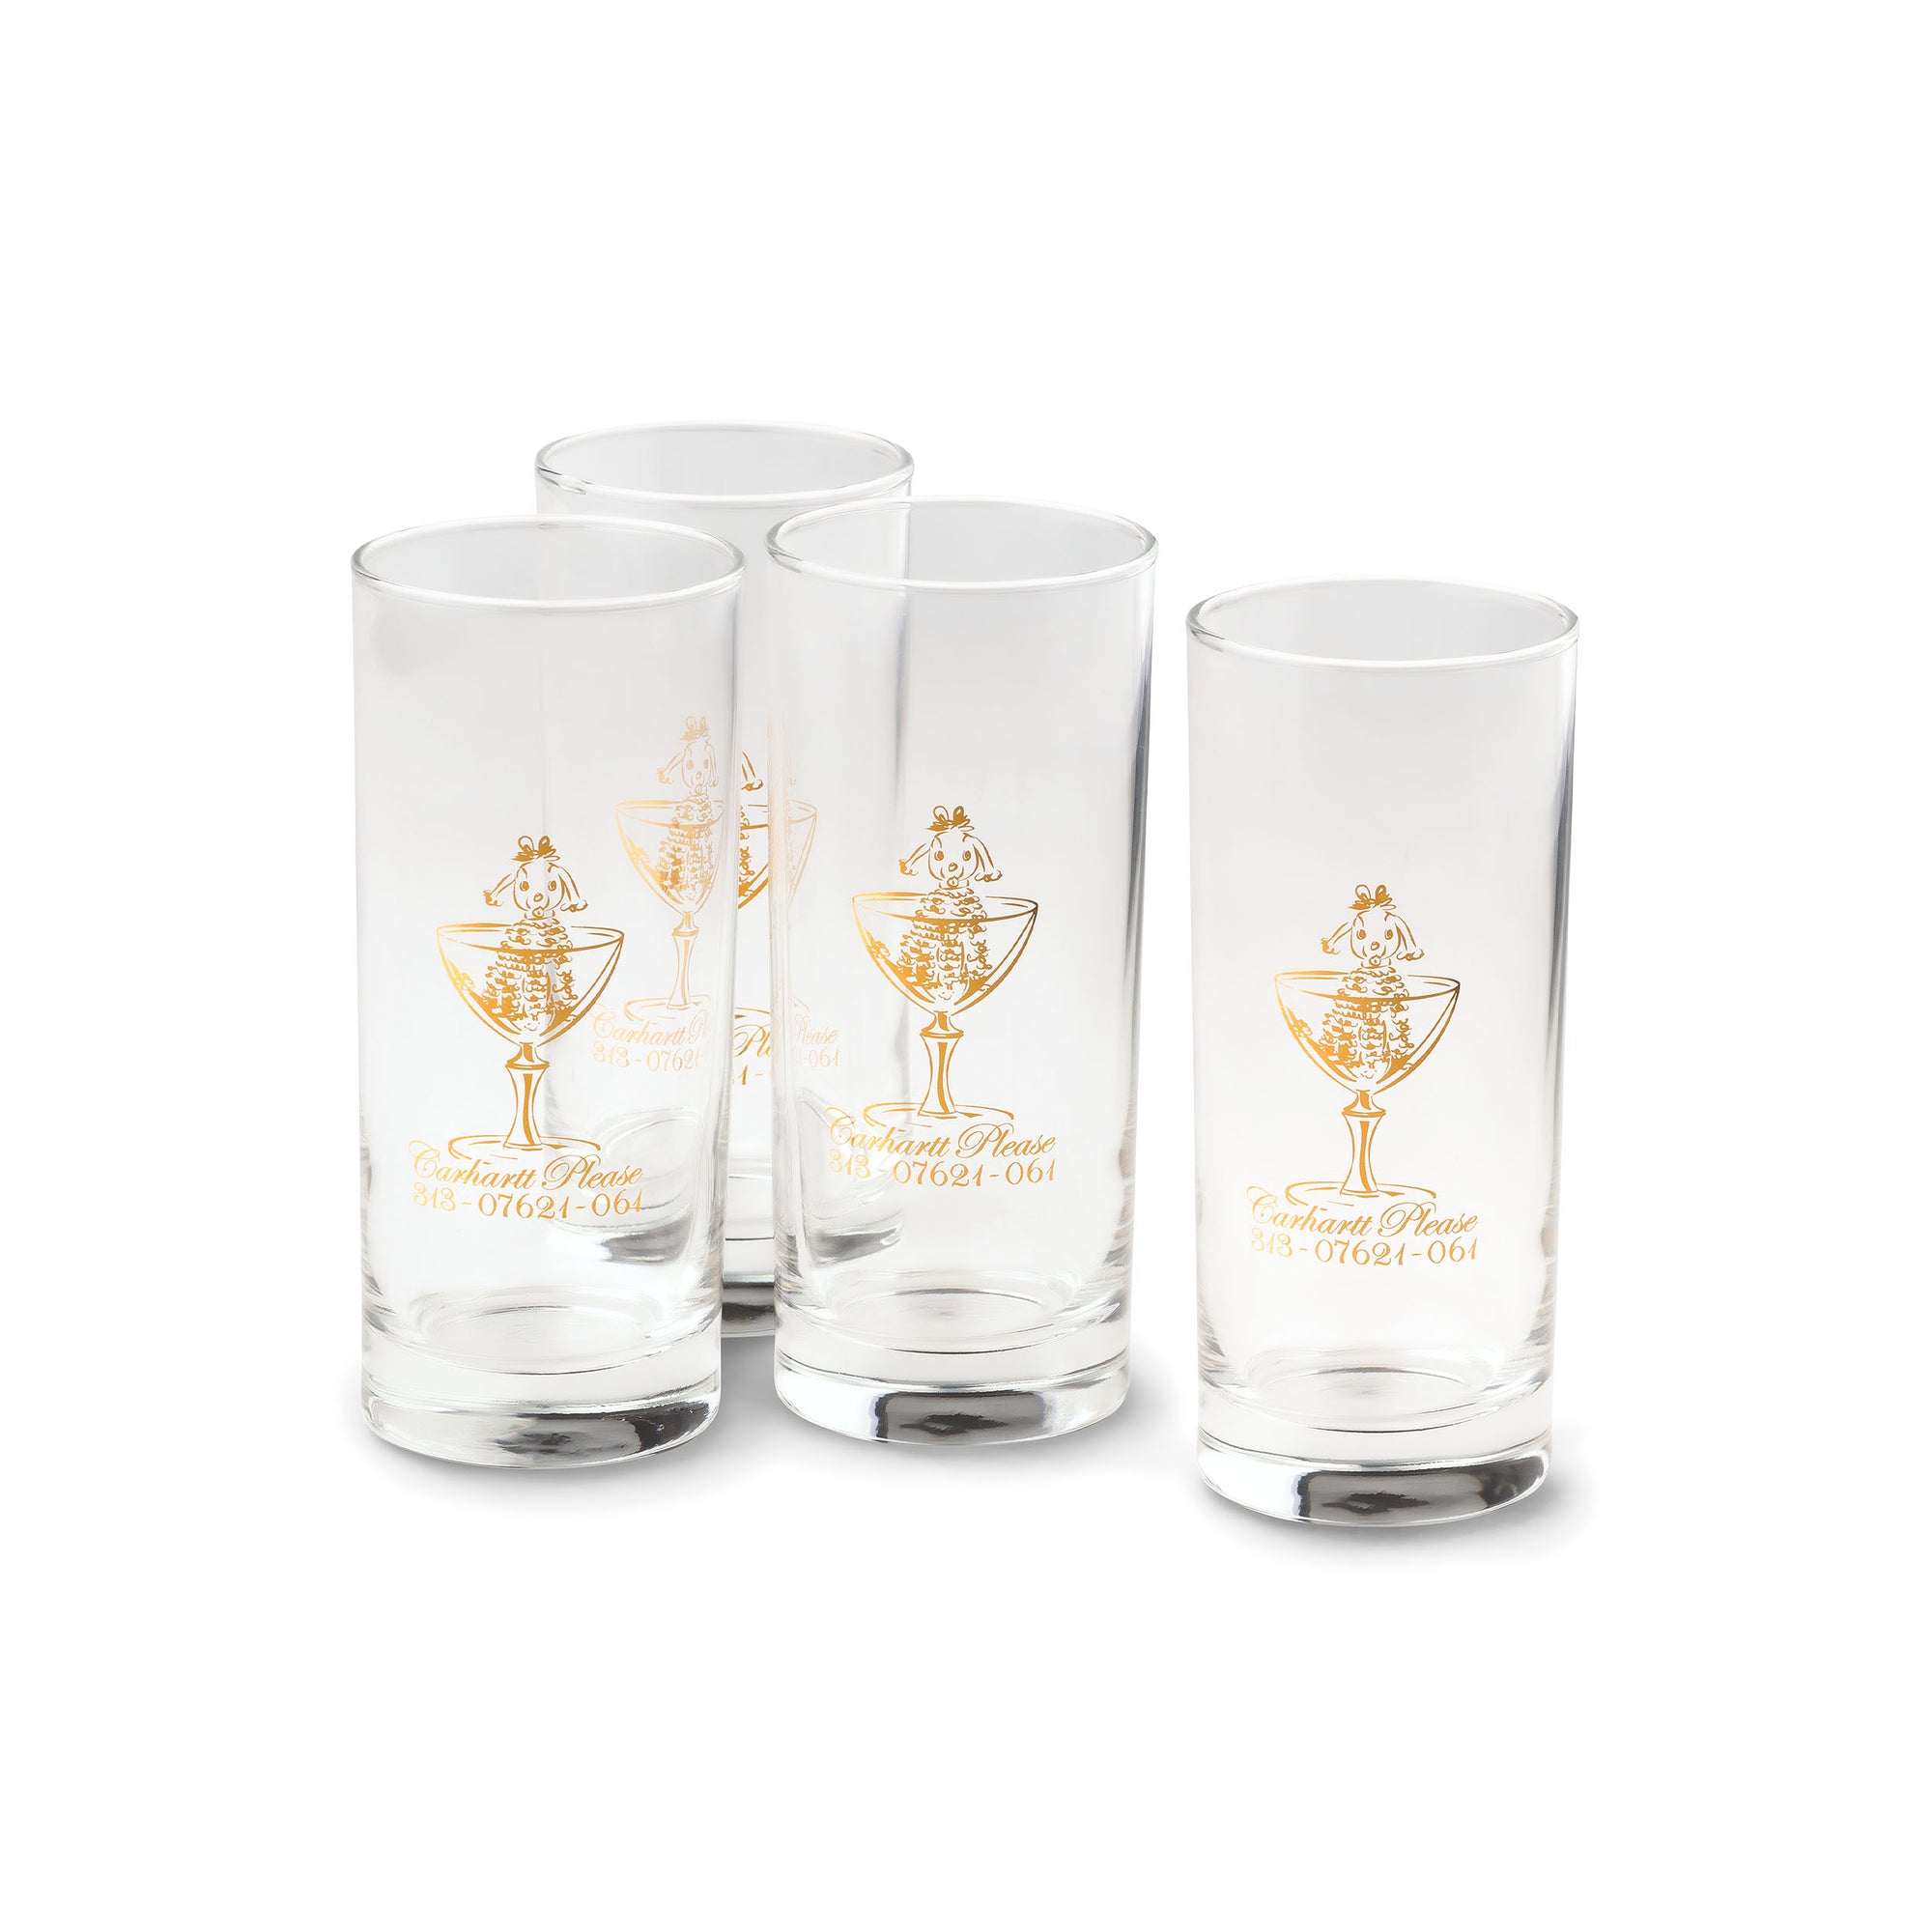 Carhartt WIP Please Glass Set (glass clear/gold) - Blue Mountain Store